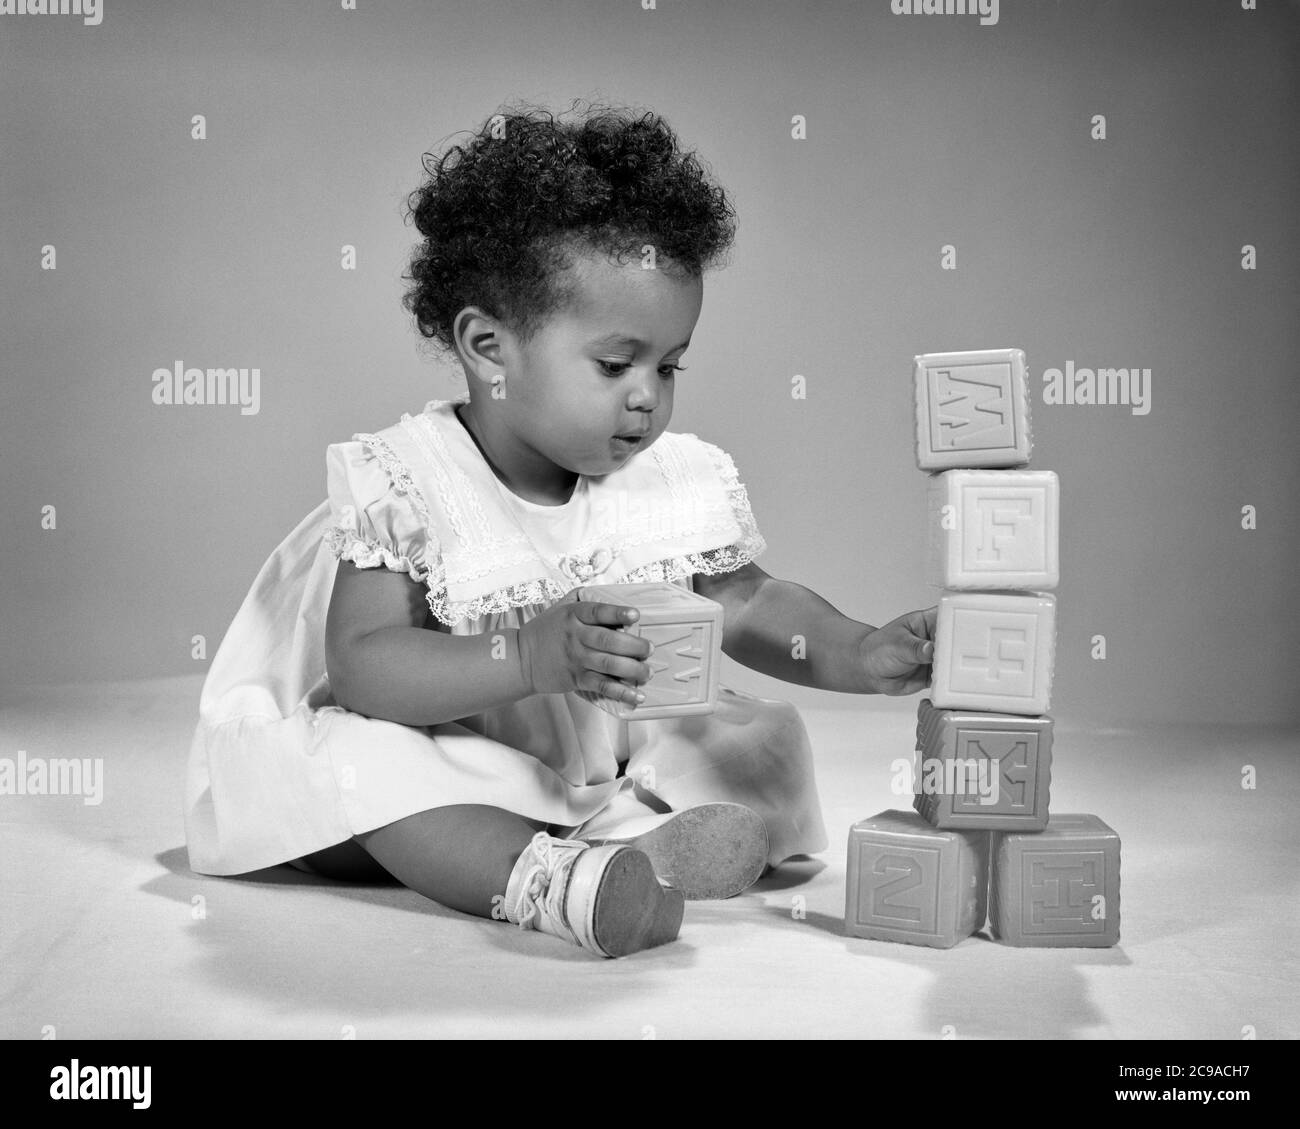 1960s BUSY CUTE AFRICAN-AMERICAN BABY GIRL TODDLER WEARING FRILLY DRESS OCCUPIED PLAYING WITH SET OF PLASTIC TOY BUILDING BLOCKS - n1989 HAR001 HARS 1 JUVENILE CUTE FACIAL STYLE BALANCE JOY LIFESTYLE FEMALES HEALTHINESS HOME LIFE COPY SPACE FULL-LENGTH CONFIDENCE EXPRESSIONS B&W GOALS SUCCESS HAPPINESS ADVENTURE DISCOVERY AFRICAN-AMERICANS AFRICAN-AMERICAN CHOICE EXCITEMENT KNOWLEDGE RECREATION BLACK ETHNICITY PRIDE FRILLY OF ENGROSSED CONCEPTUAL STYLISH OCCUPIED CREATIVITY GROWTH JUVENILES SOLUTIONS BLACK AND WHITE HAR001 OLD FASHIONED AFRICAN AMERICANS Stock Photo